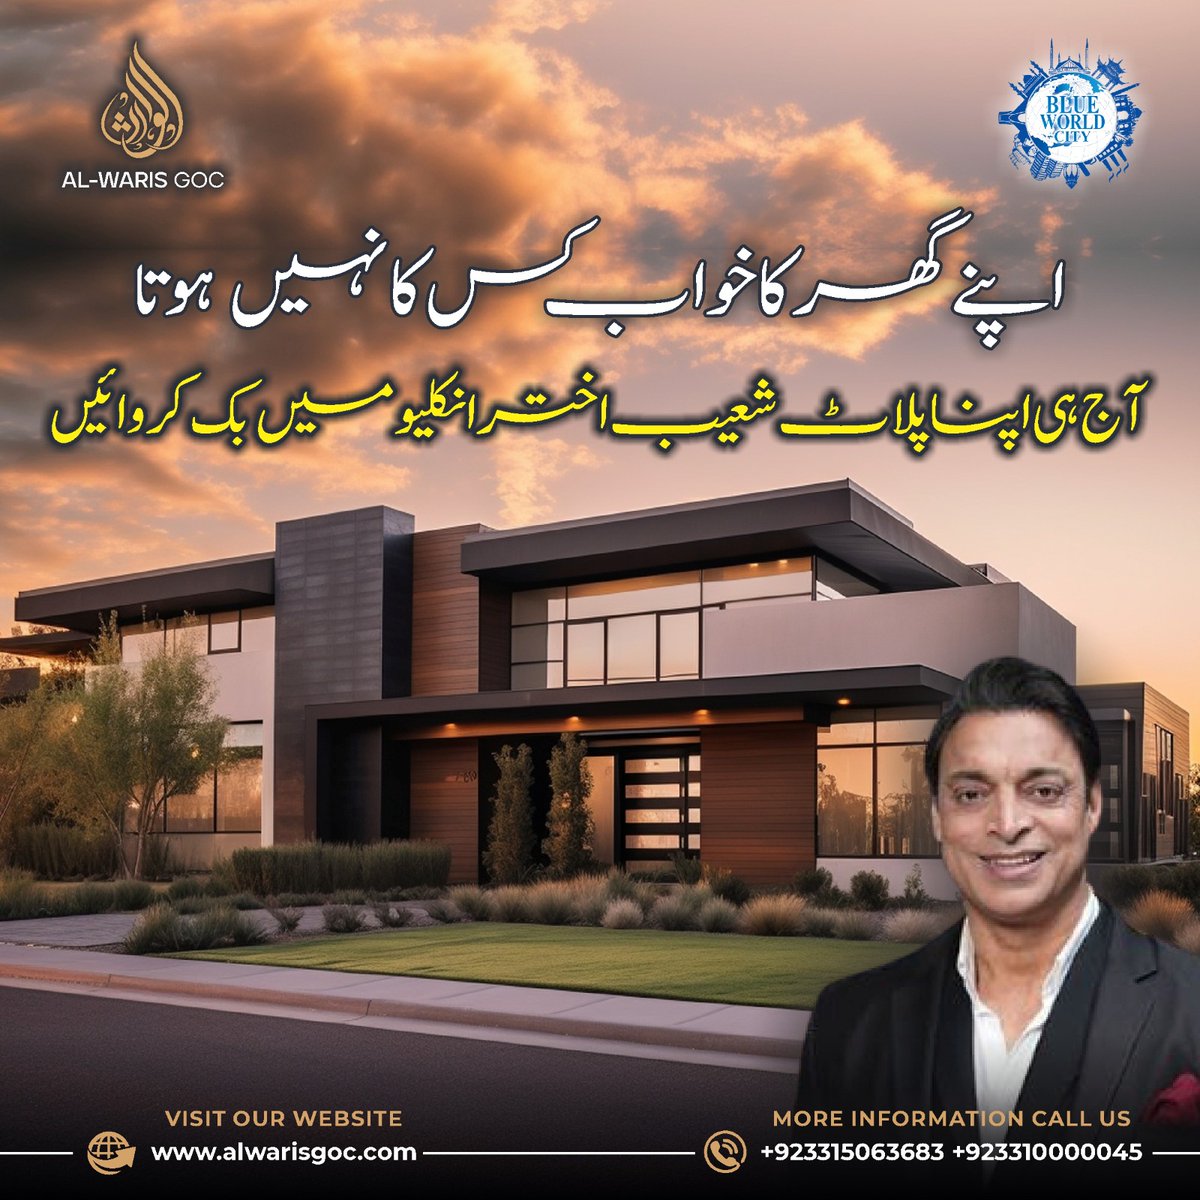 The Shoaib Akhter Enclave in Blue World City is a special part of the fancy housing area. It's named after the famous cricket player Shoaib Akhtar. 

For more details  
📞+923315063683 +923310000045

#blueworldcity #shoaibakhterenclave #overseasblock #alwarisgoc